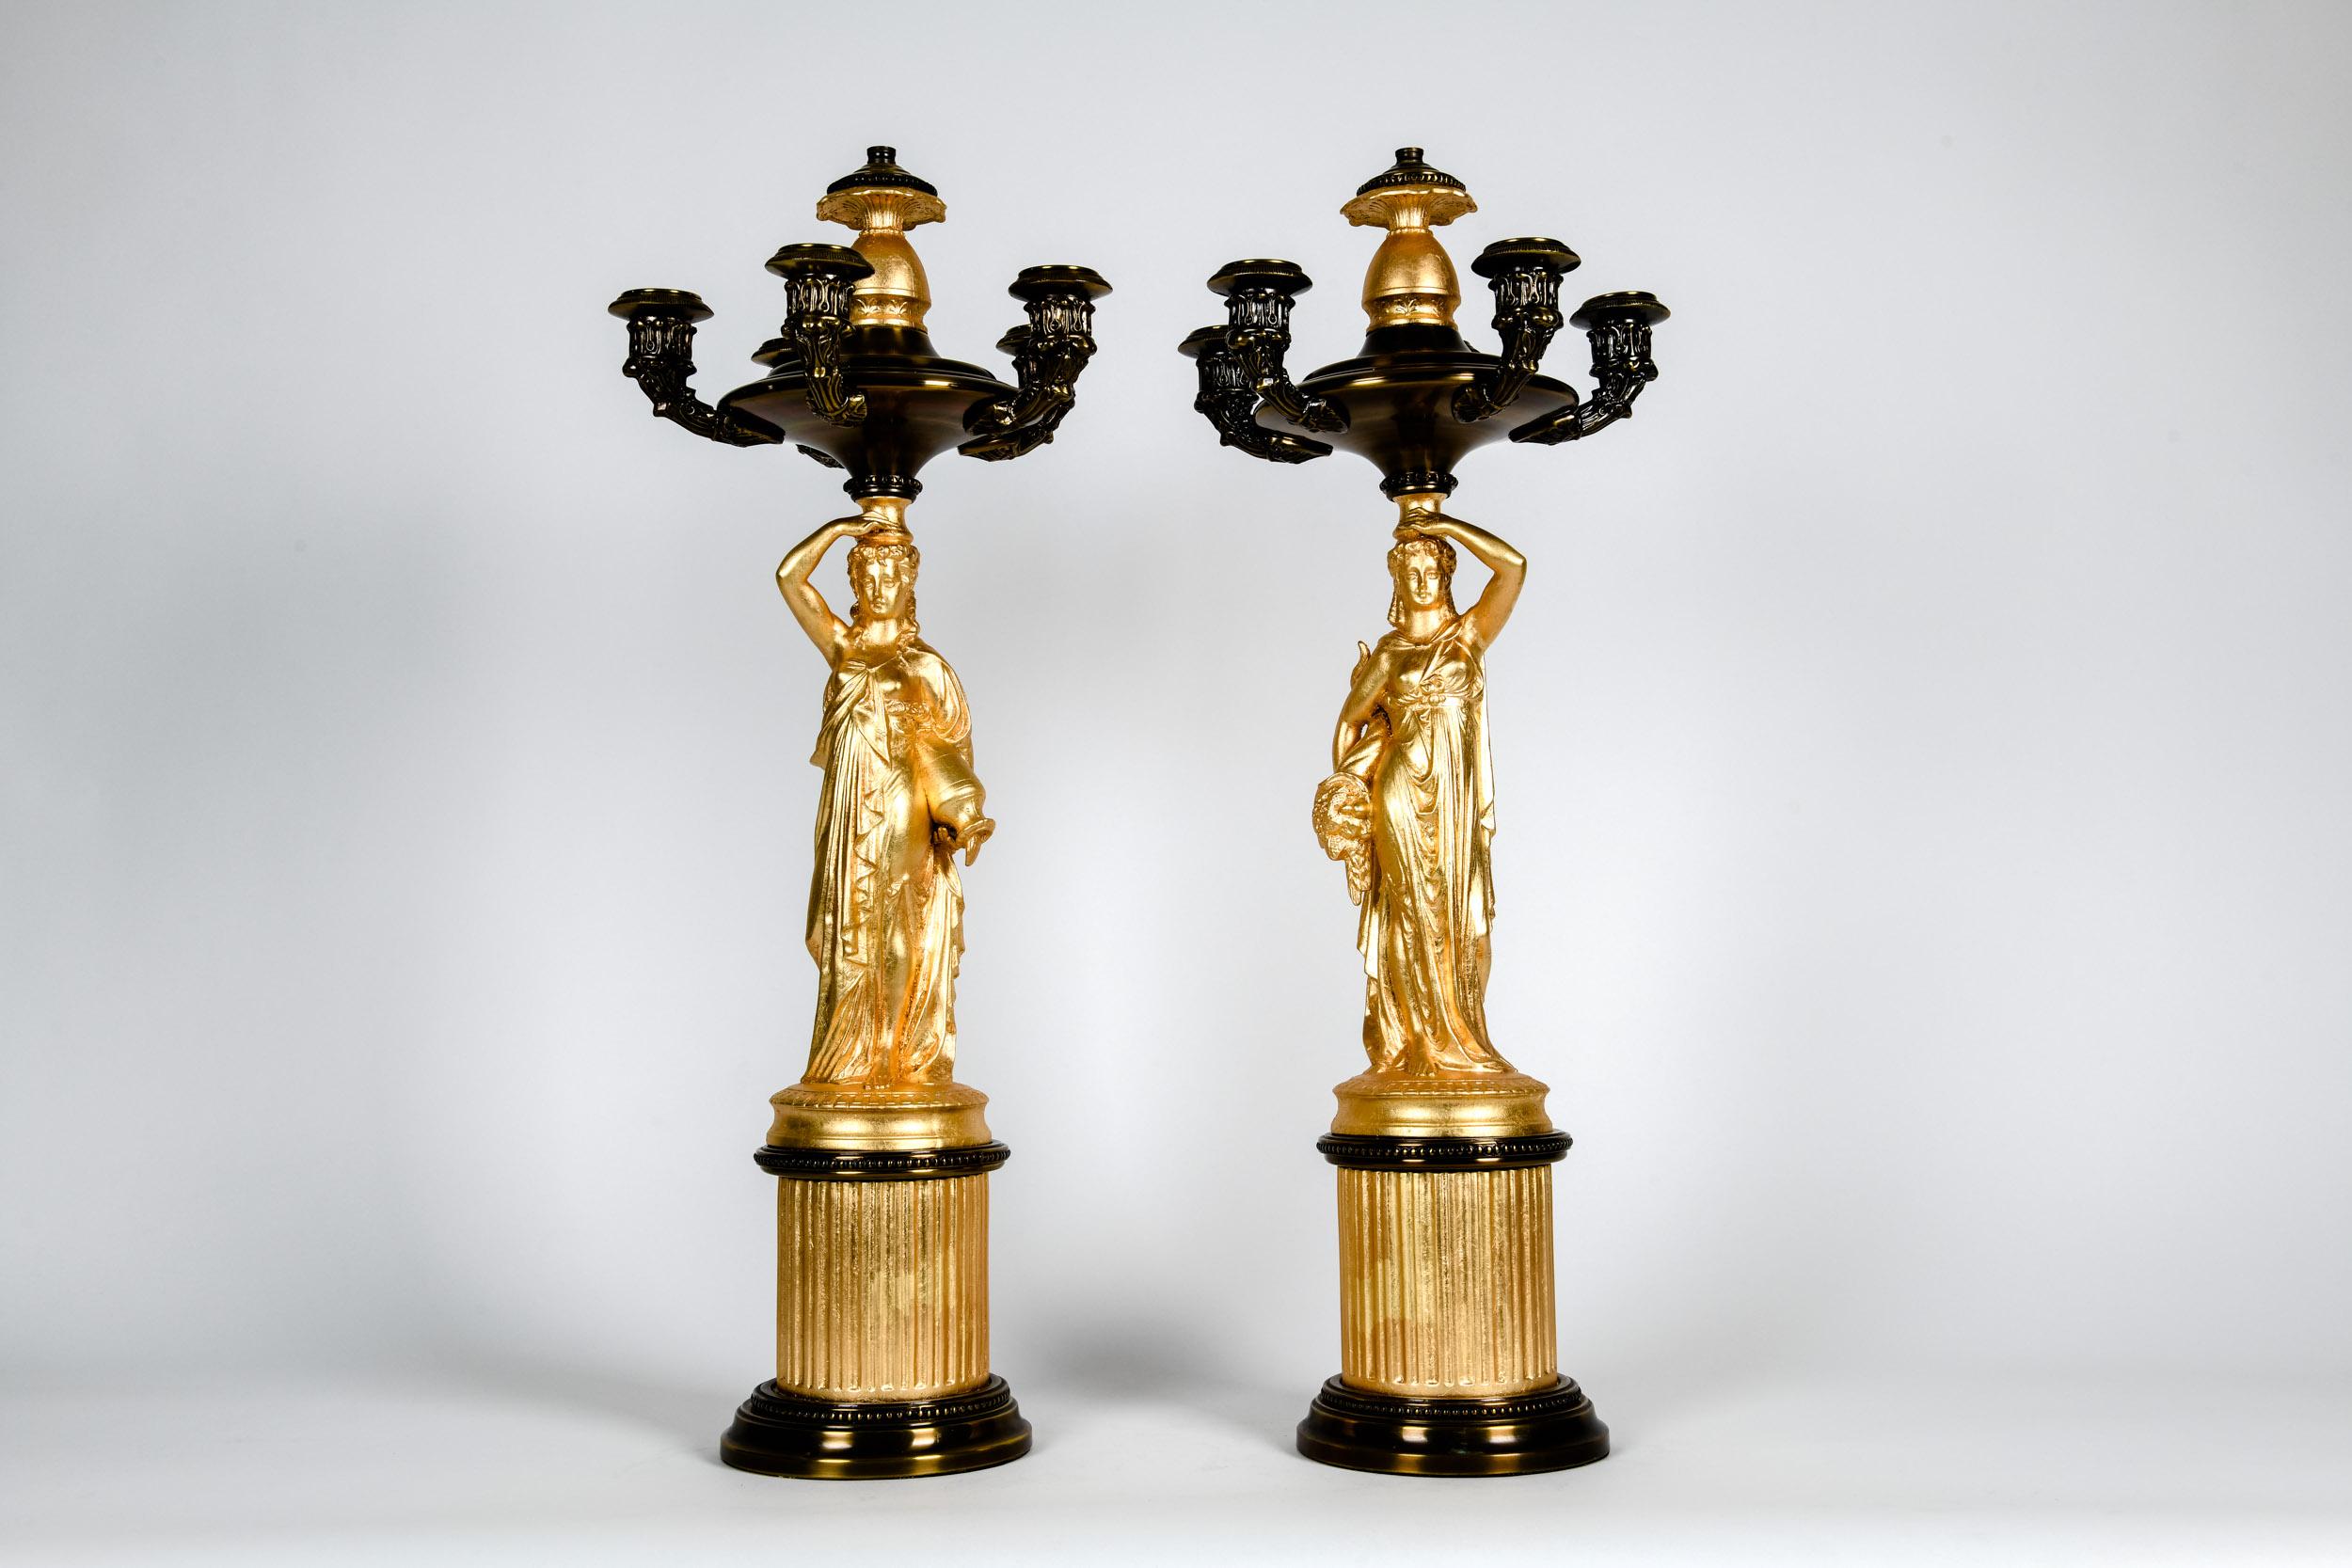 Antique pair of French porcelain / bronze five arms candelabras. Each candelabras is in excellent antique condition. Minor wear consistent with age / use. They were electrify at some point. Each candelabras measure about 25 inches tall X 11 inches